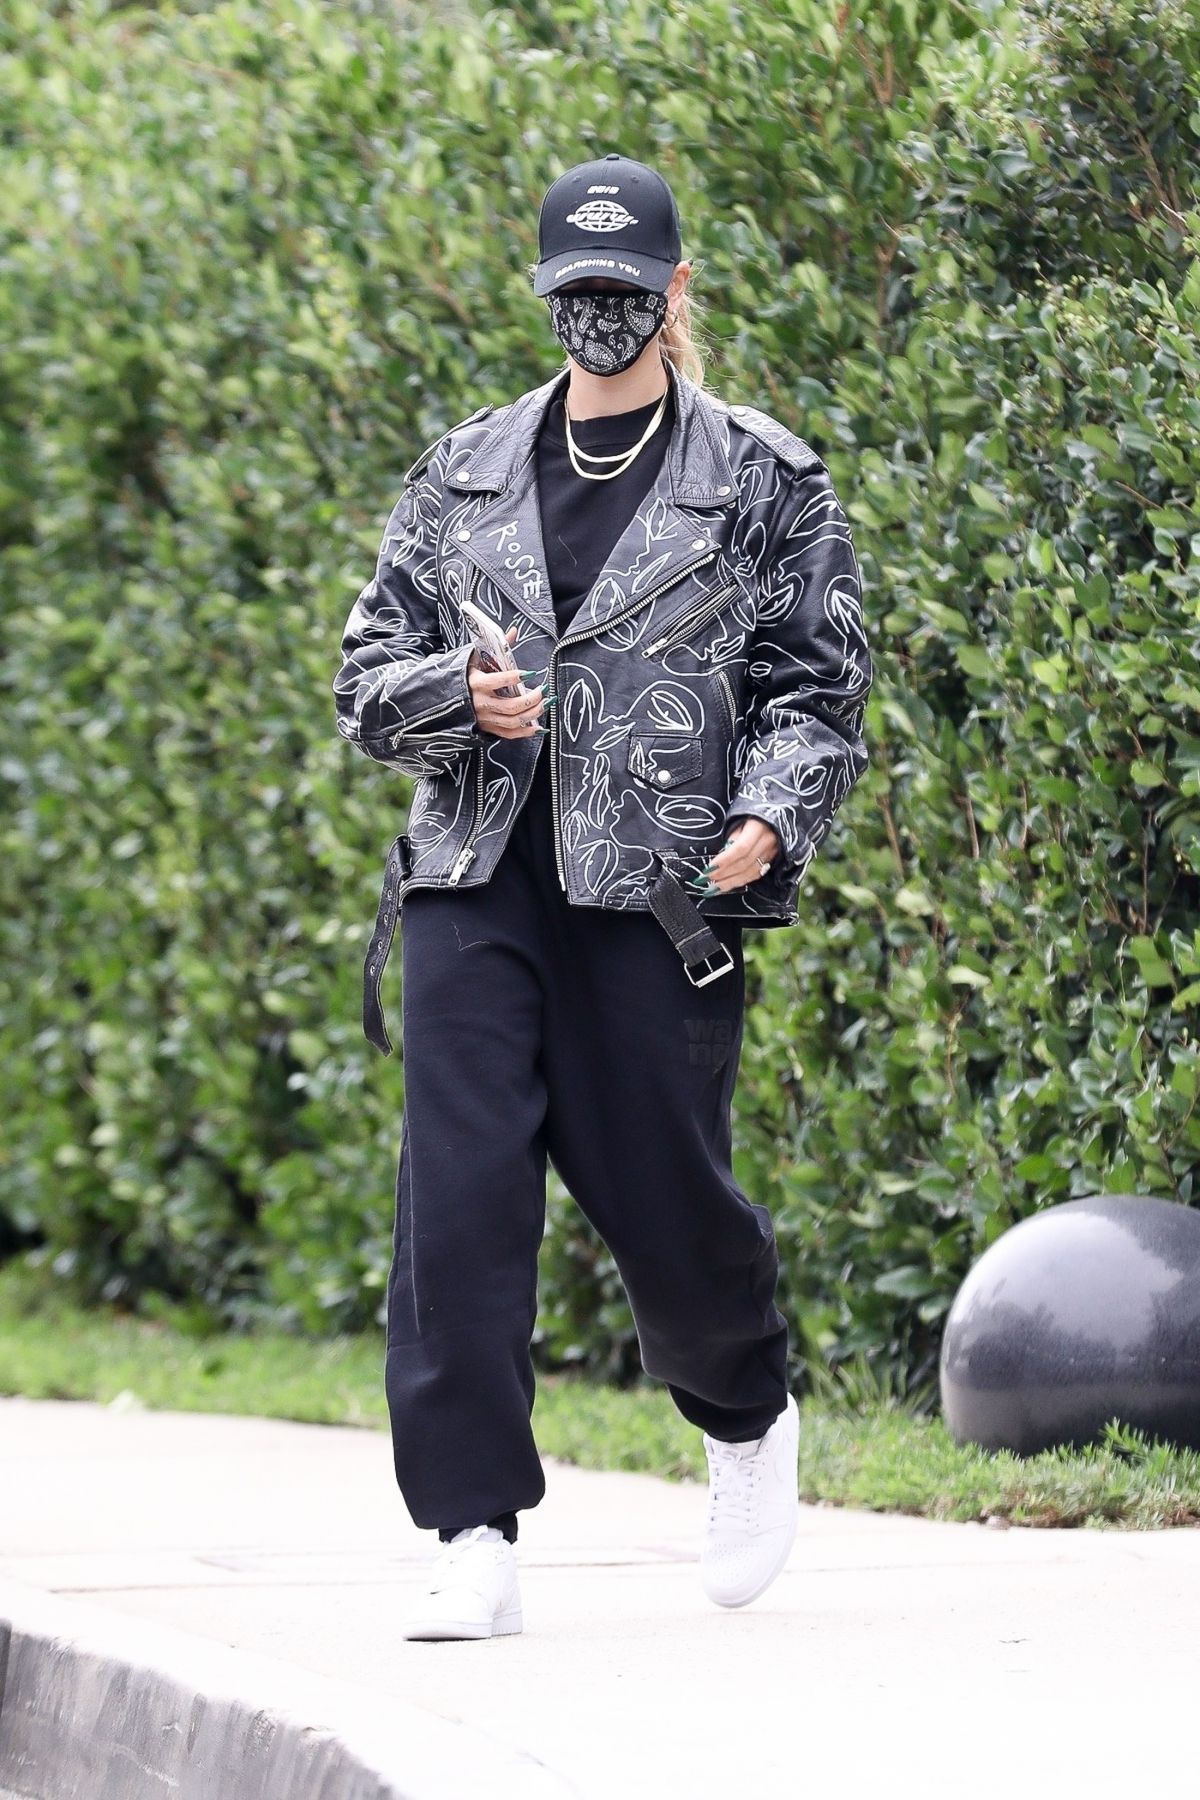 hailey-bieber-leaves-a-friend-s-house-in-beverly-hills-10-24-2020-6.jpg